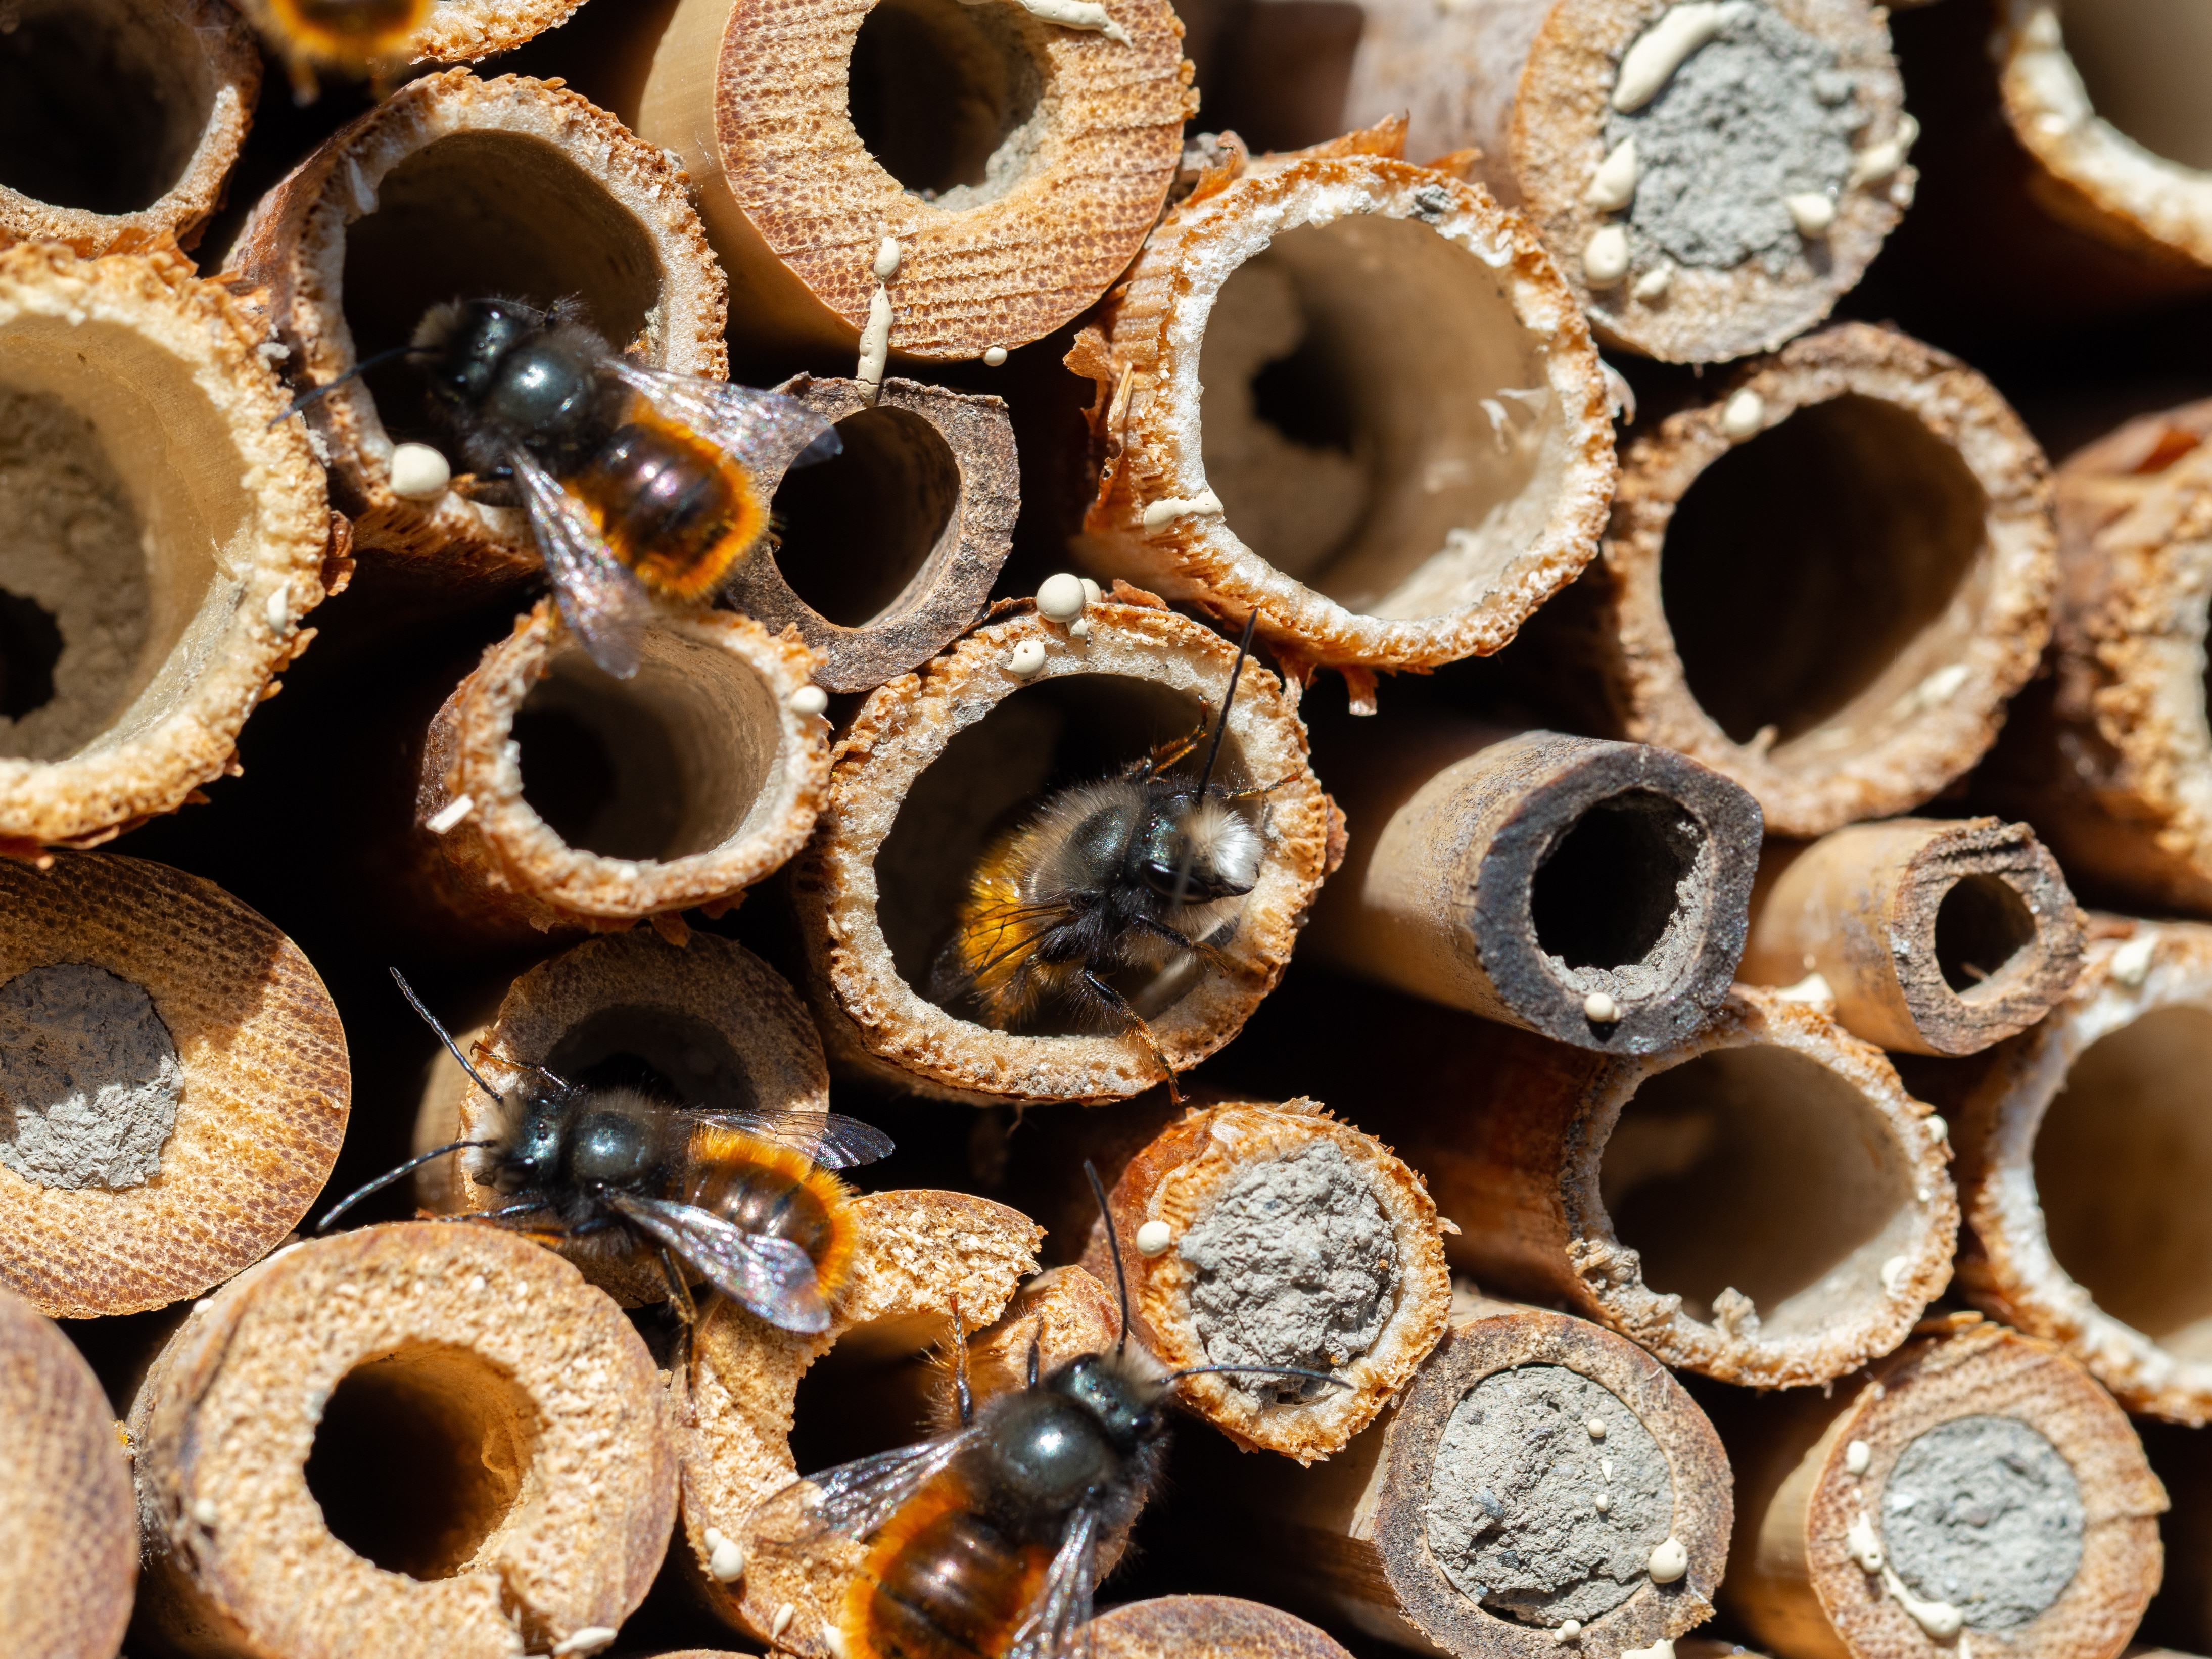 Mason bees at an insect hotel in spring